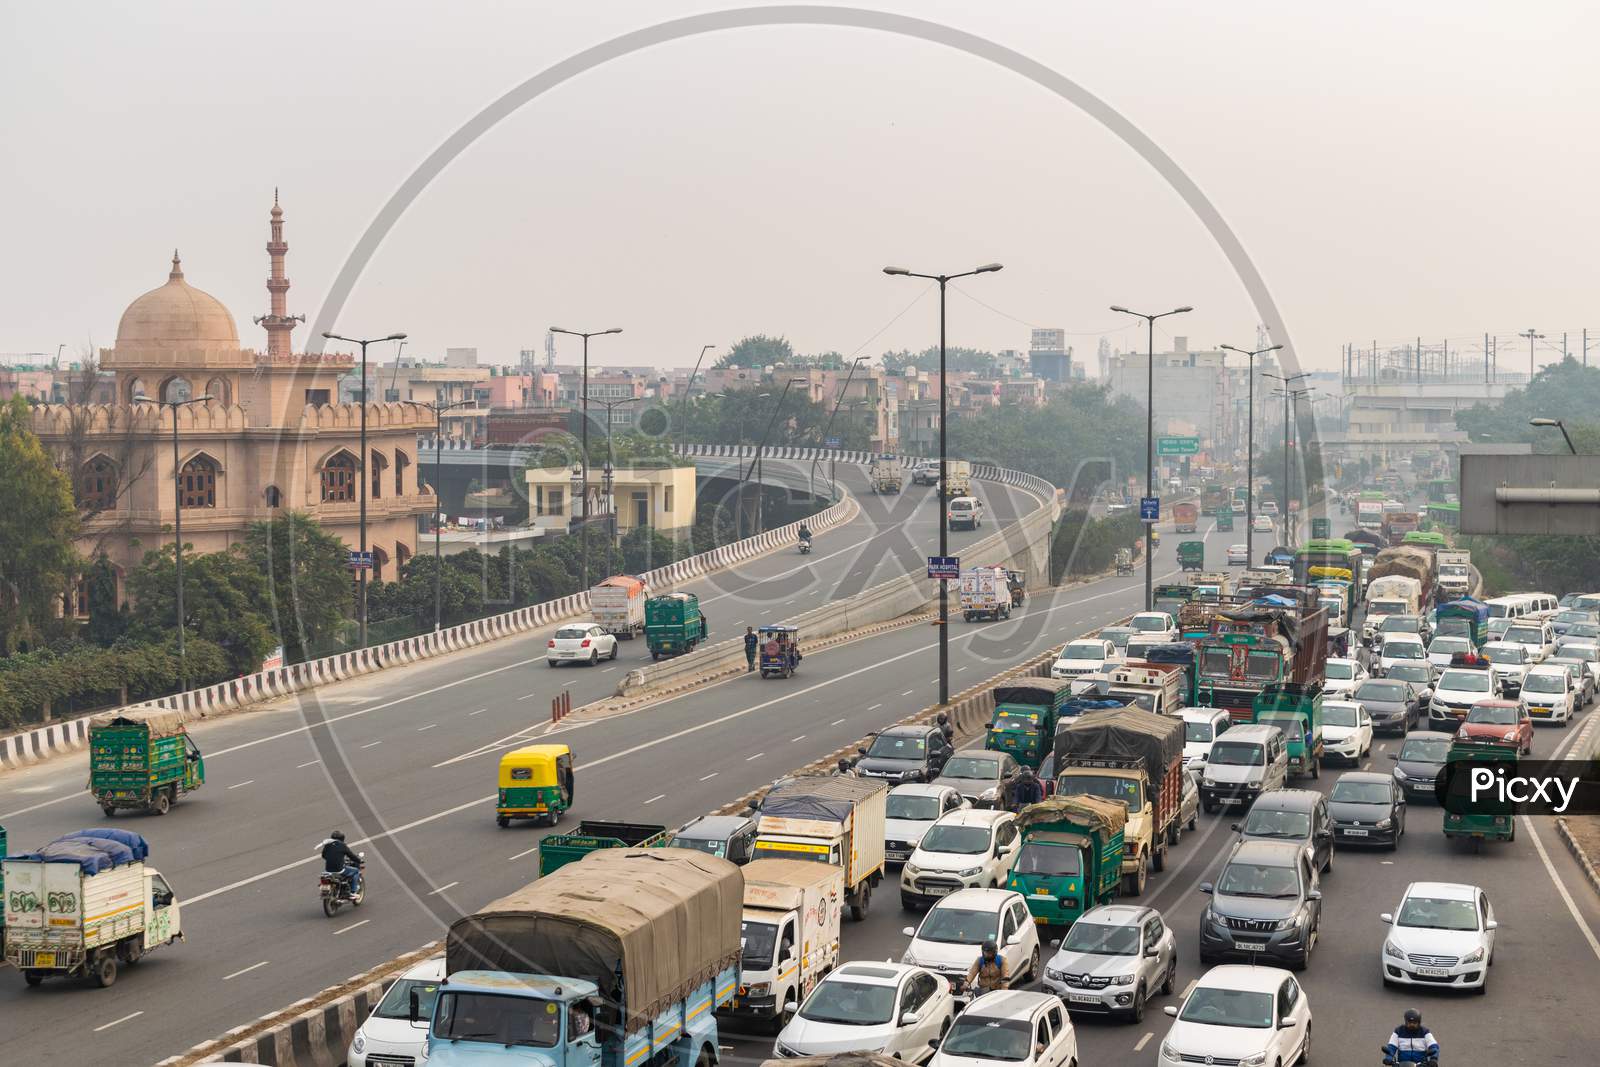 Traffic Congestion at GT Karnal Road, Grand Trunk Road and Madina Masjid to the left